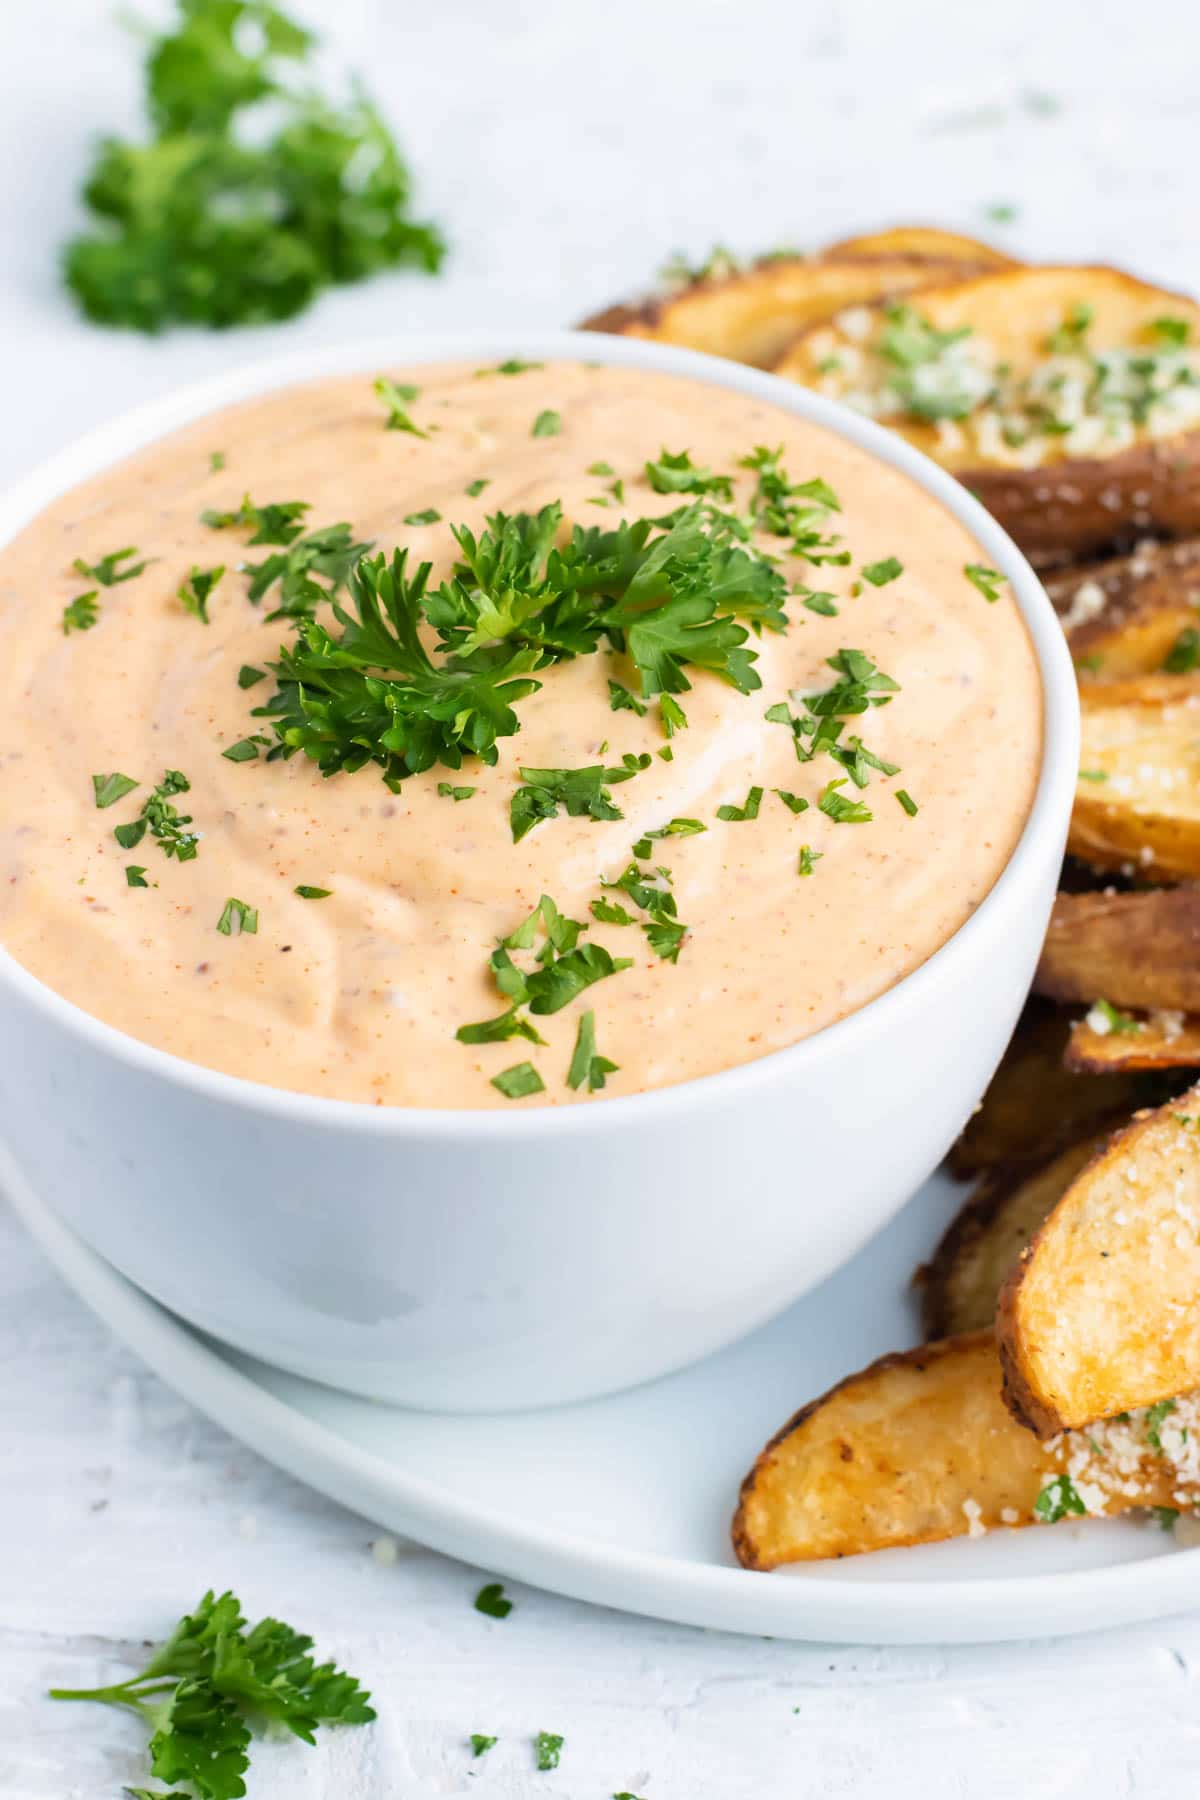 A bowl full of remoulade sauce next to a plate of baked potato wedges.